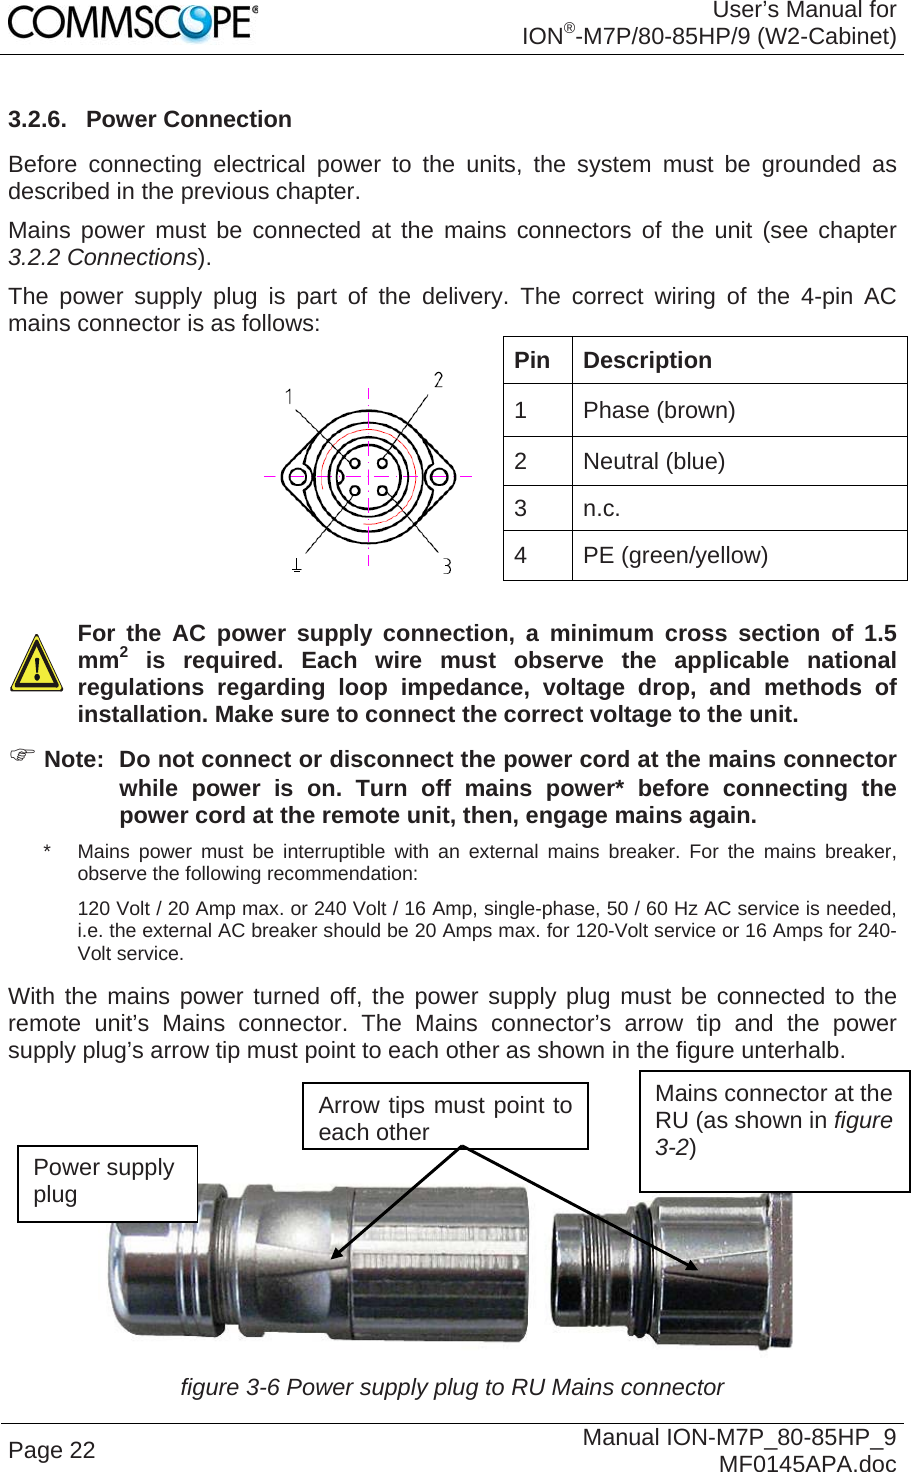 User’s Manual for ION®-M7P/80-85HP/9 (W2-Cabinet) Page 22  Manual ION-M7P_80-85HP_9 MF0145APA.doc 3.2.6. Power Connection Before connecting electrical power to the units, the system must be grounded as described in the previous chapter.  Mains power must be connected at the mains connectors of the unit (see chapter 3.2.2 Connections).  The power supply plug is part of the delivery. The correct wiring of the 4-pin AC mains connector is as follows:  Pin Description 1 Phase (brown) 2 Neutral (blue) 3 n.c. 4 PE (green/yellow)    For the AC power supply connection, a minimum cross section of 1.5 mm2 is required. Each wire must observe the applicable national regulations regarding loop impedance, voltage drop, and methods of installation. Make sure to connect the correct voltage to the unit.  Note:  Do not connect or disconnect the power cord at the mains connector while power is on. Turn off mains power* before connecting the power cord at the remote unit, then, engage mains again. *   Mains power must be interruptible with an external mains breaker. For the mains breaker, observe the following recommendation: 120 Volt / 20 Amp max. or 240 Volt / 16 Amp, single-phase, 50 / 60 Hz AC service is needed, i.e. the external AC breaker should be 20 Amps max. for 120-Volt service or 16 Amps for 240-Volt service. With the mains power turned off, the power supply plug must be connected to the remote unit’s Mains connector. The Mains connector’s arrow tip and the power supply plug’s arrow tip must point to each other as shown in the figure unterhalb.     figure 3-6 Power supply plug to RU Mains connector Power supply plug Mains connector at the RU (as shown in figure 3-2) Arrow tips must point to each other